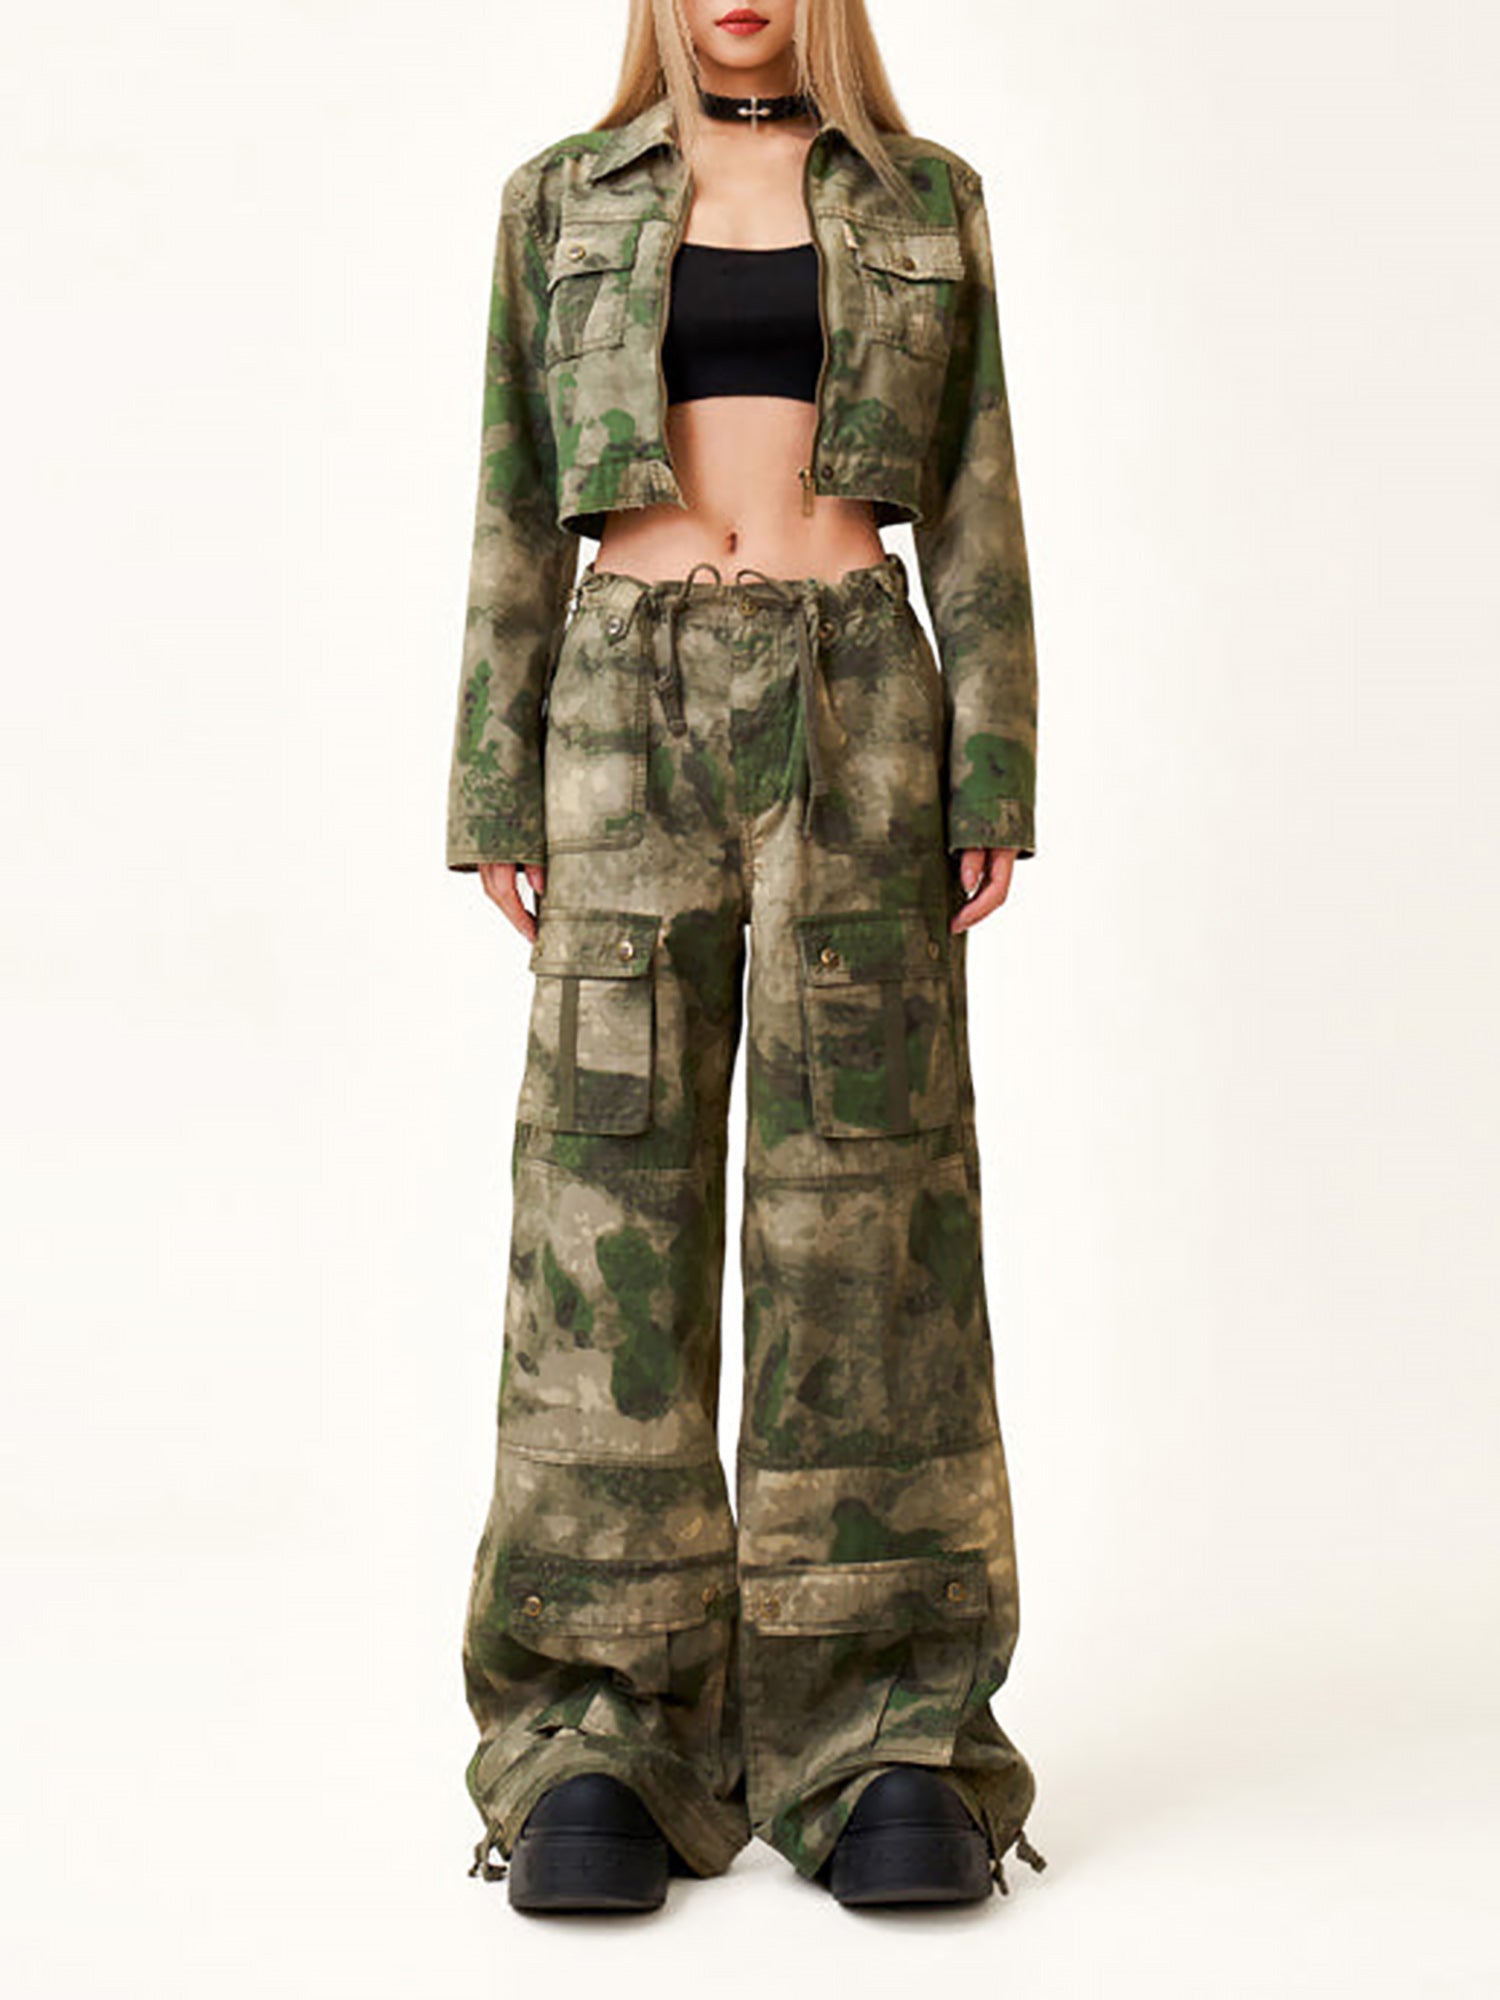 Thesupermade Viper Thermal Camouflage Hiking Pants Adjustable Wide Leg Pants